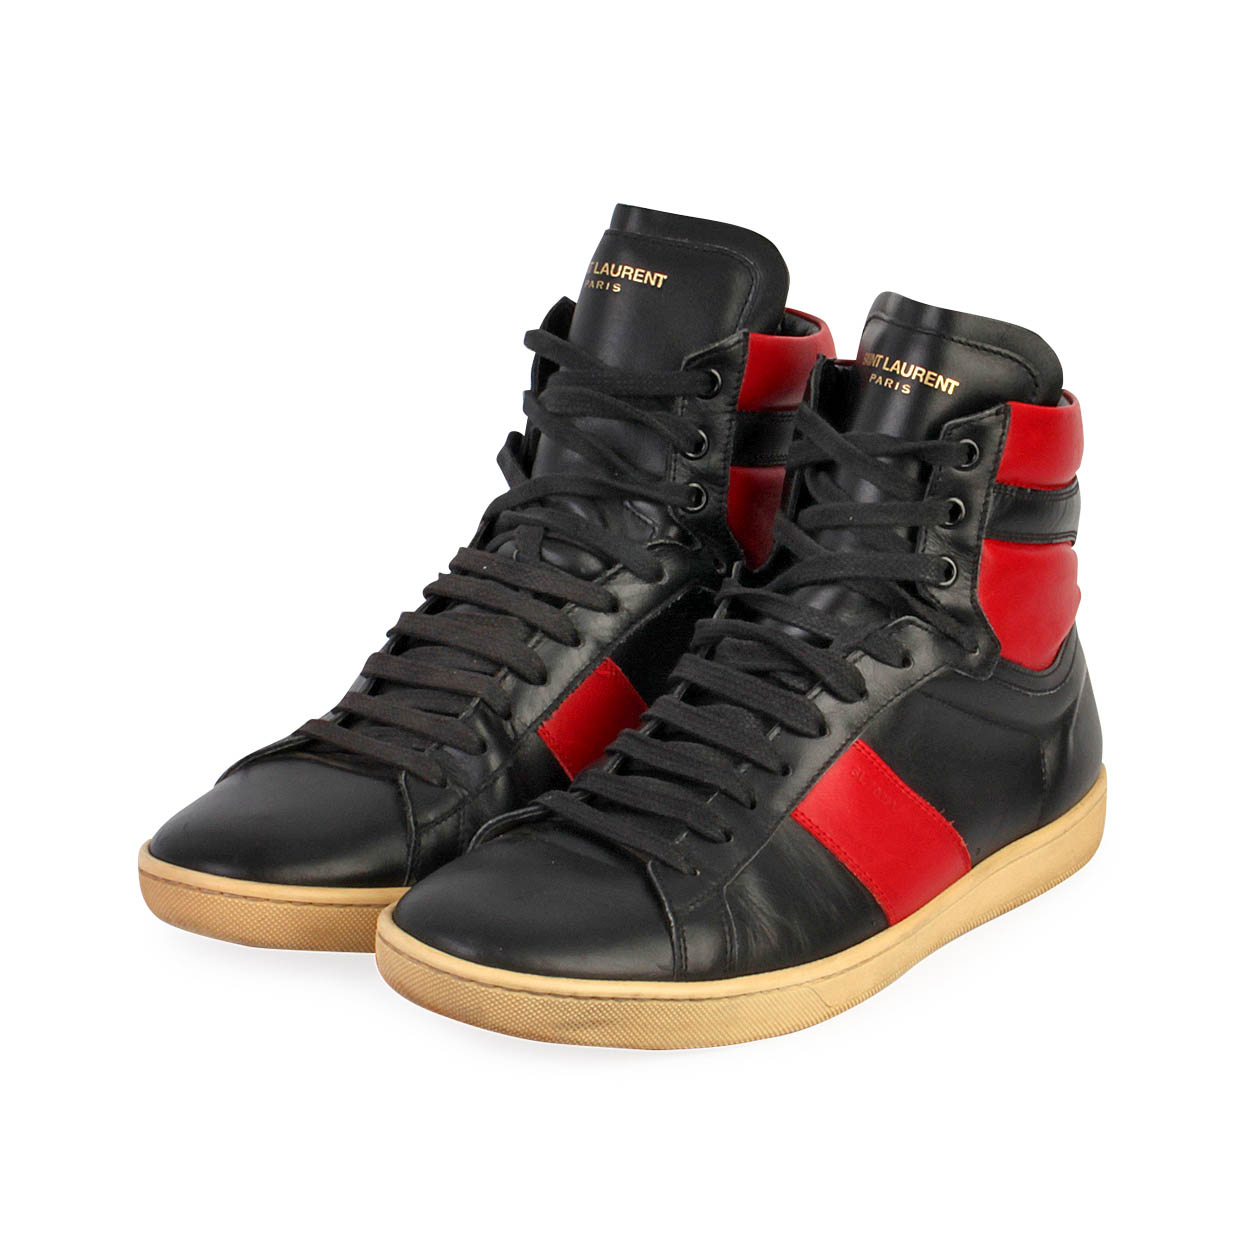 SAINT LAURENT Leather High Top Sneakers 